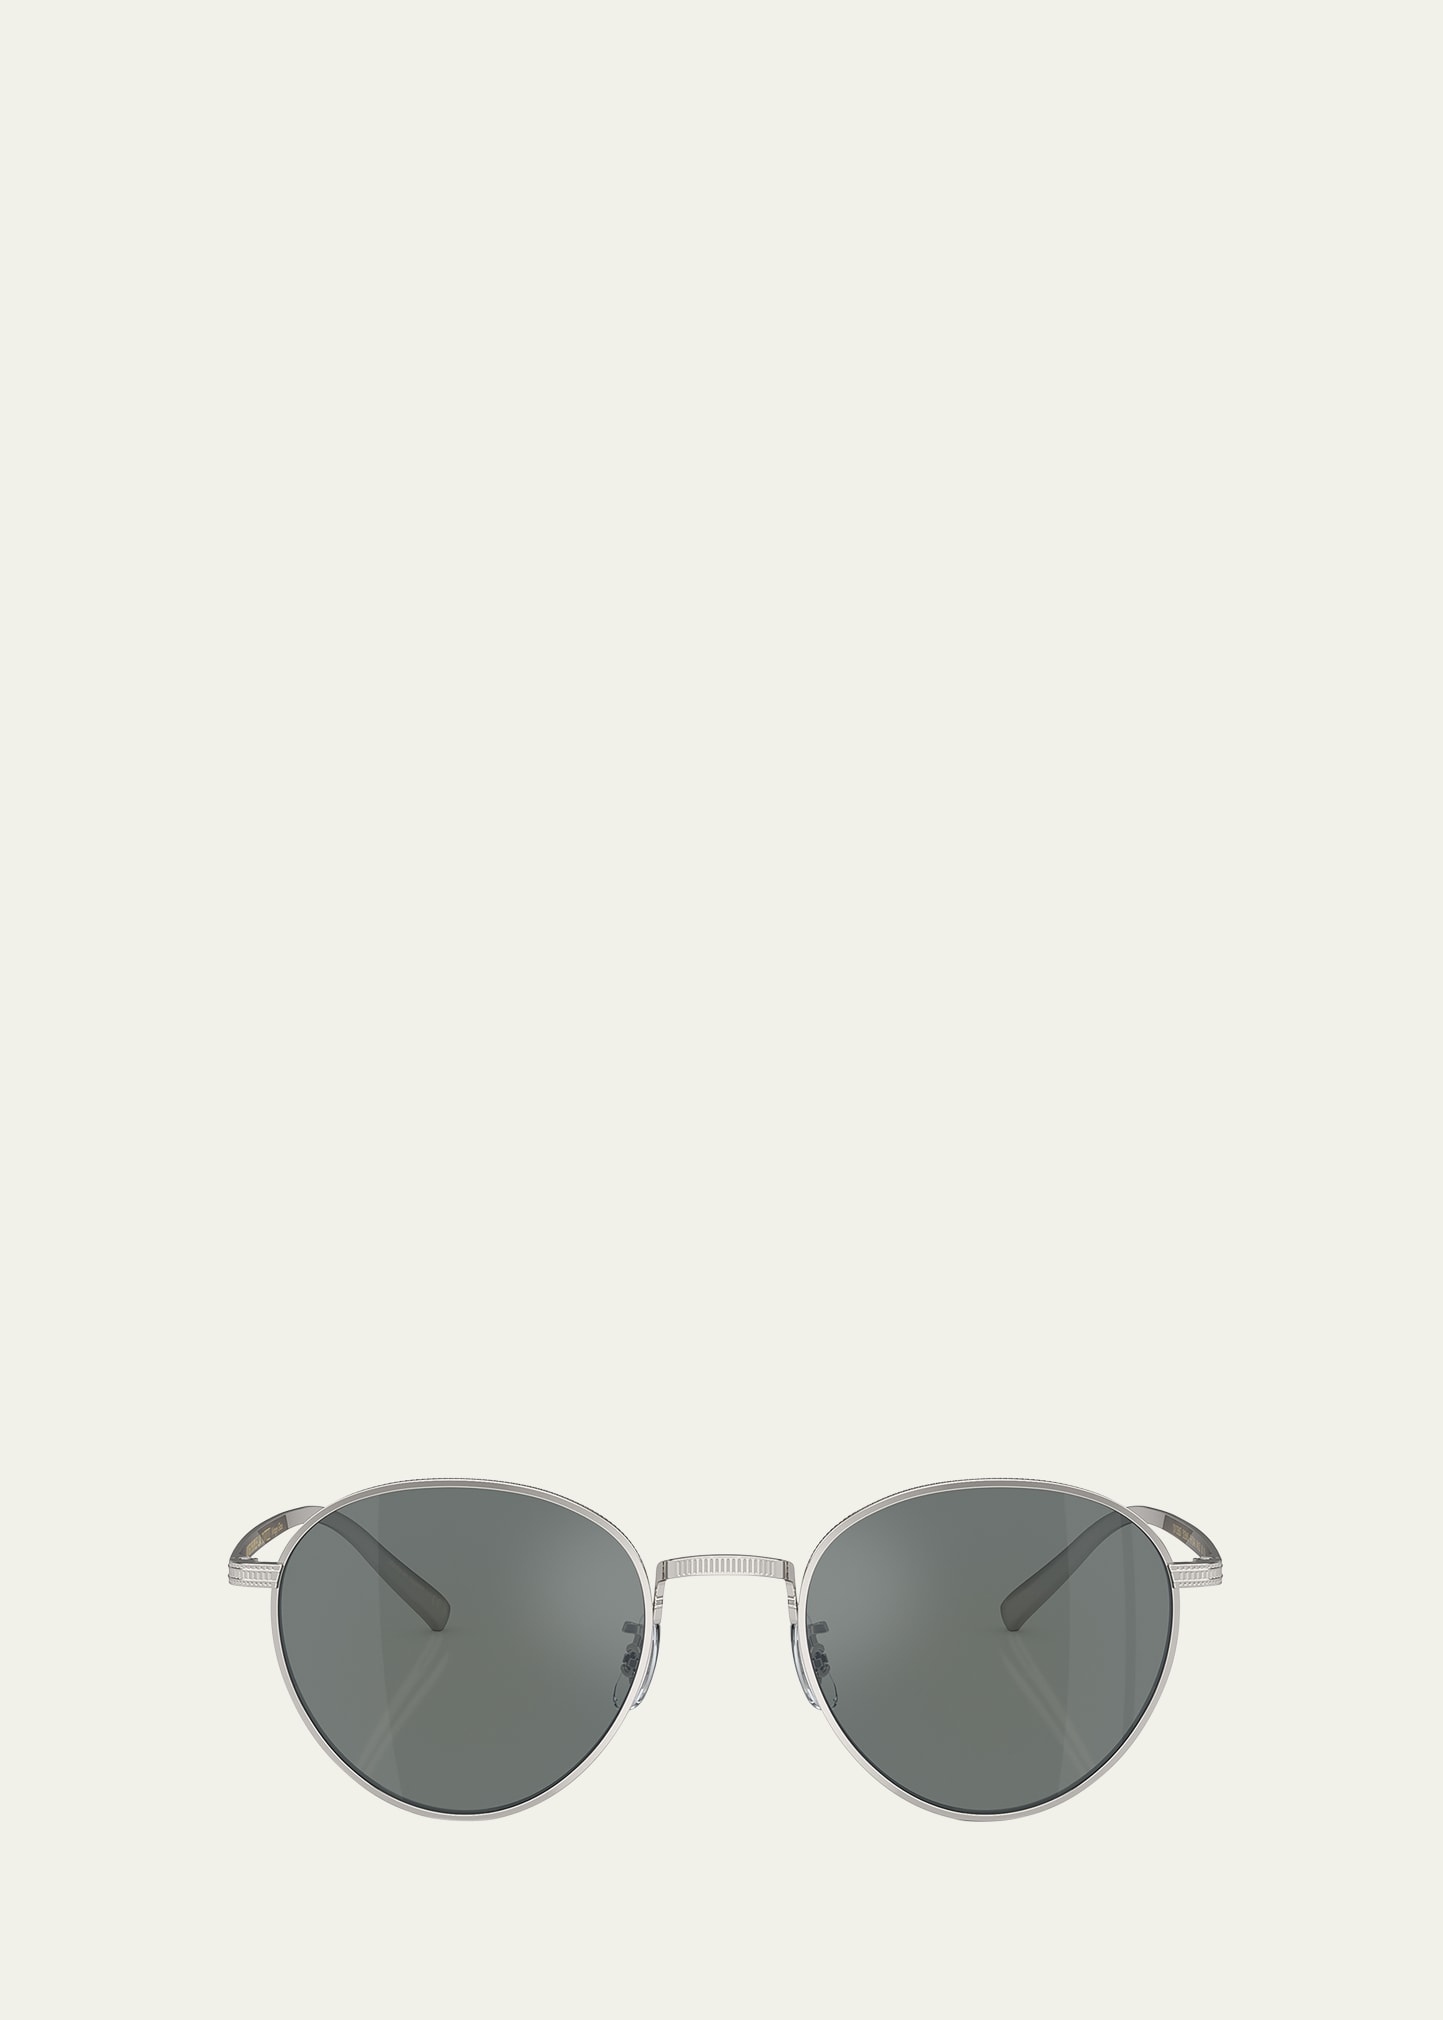 Shop Oliver Peoples Men's Rhydian Titanium Round Sunglasses In Silver